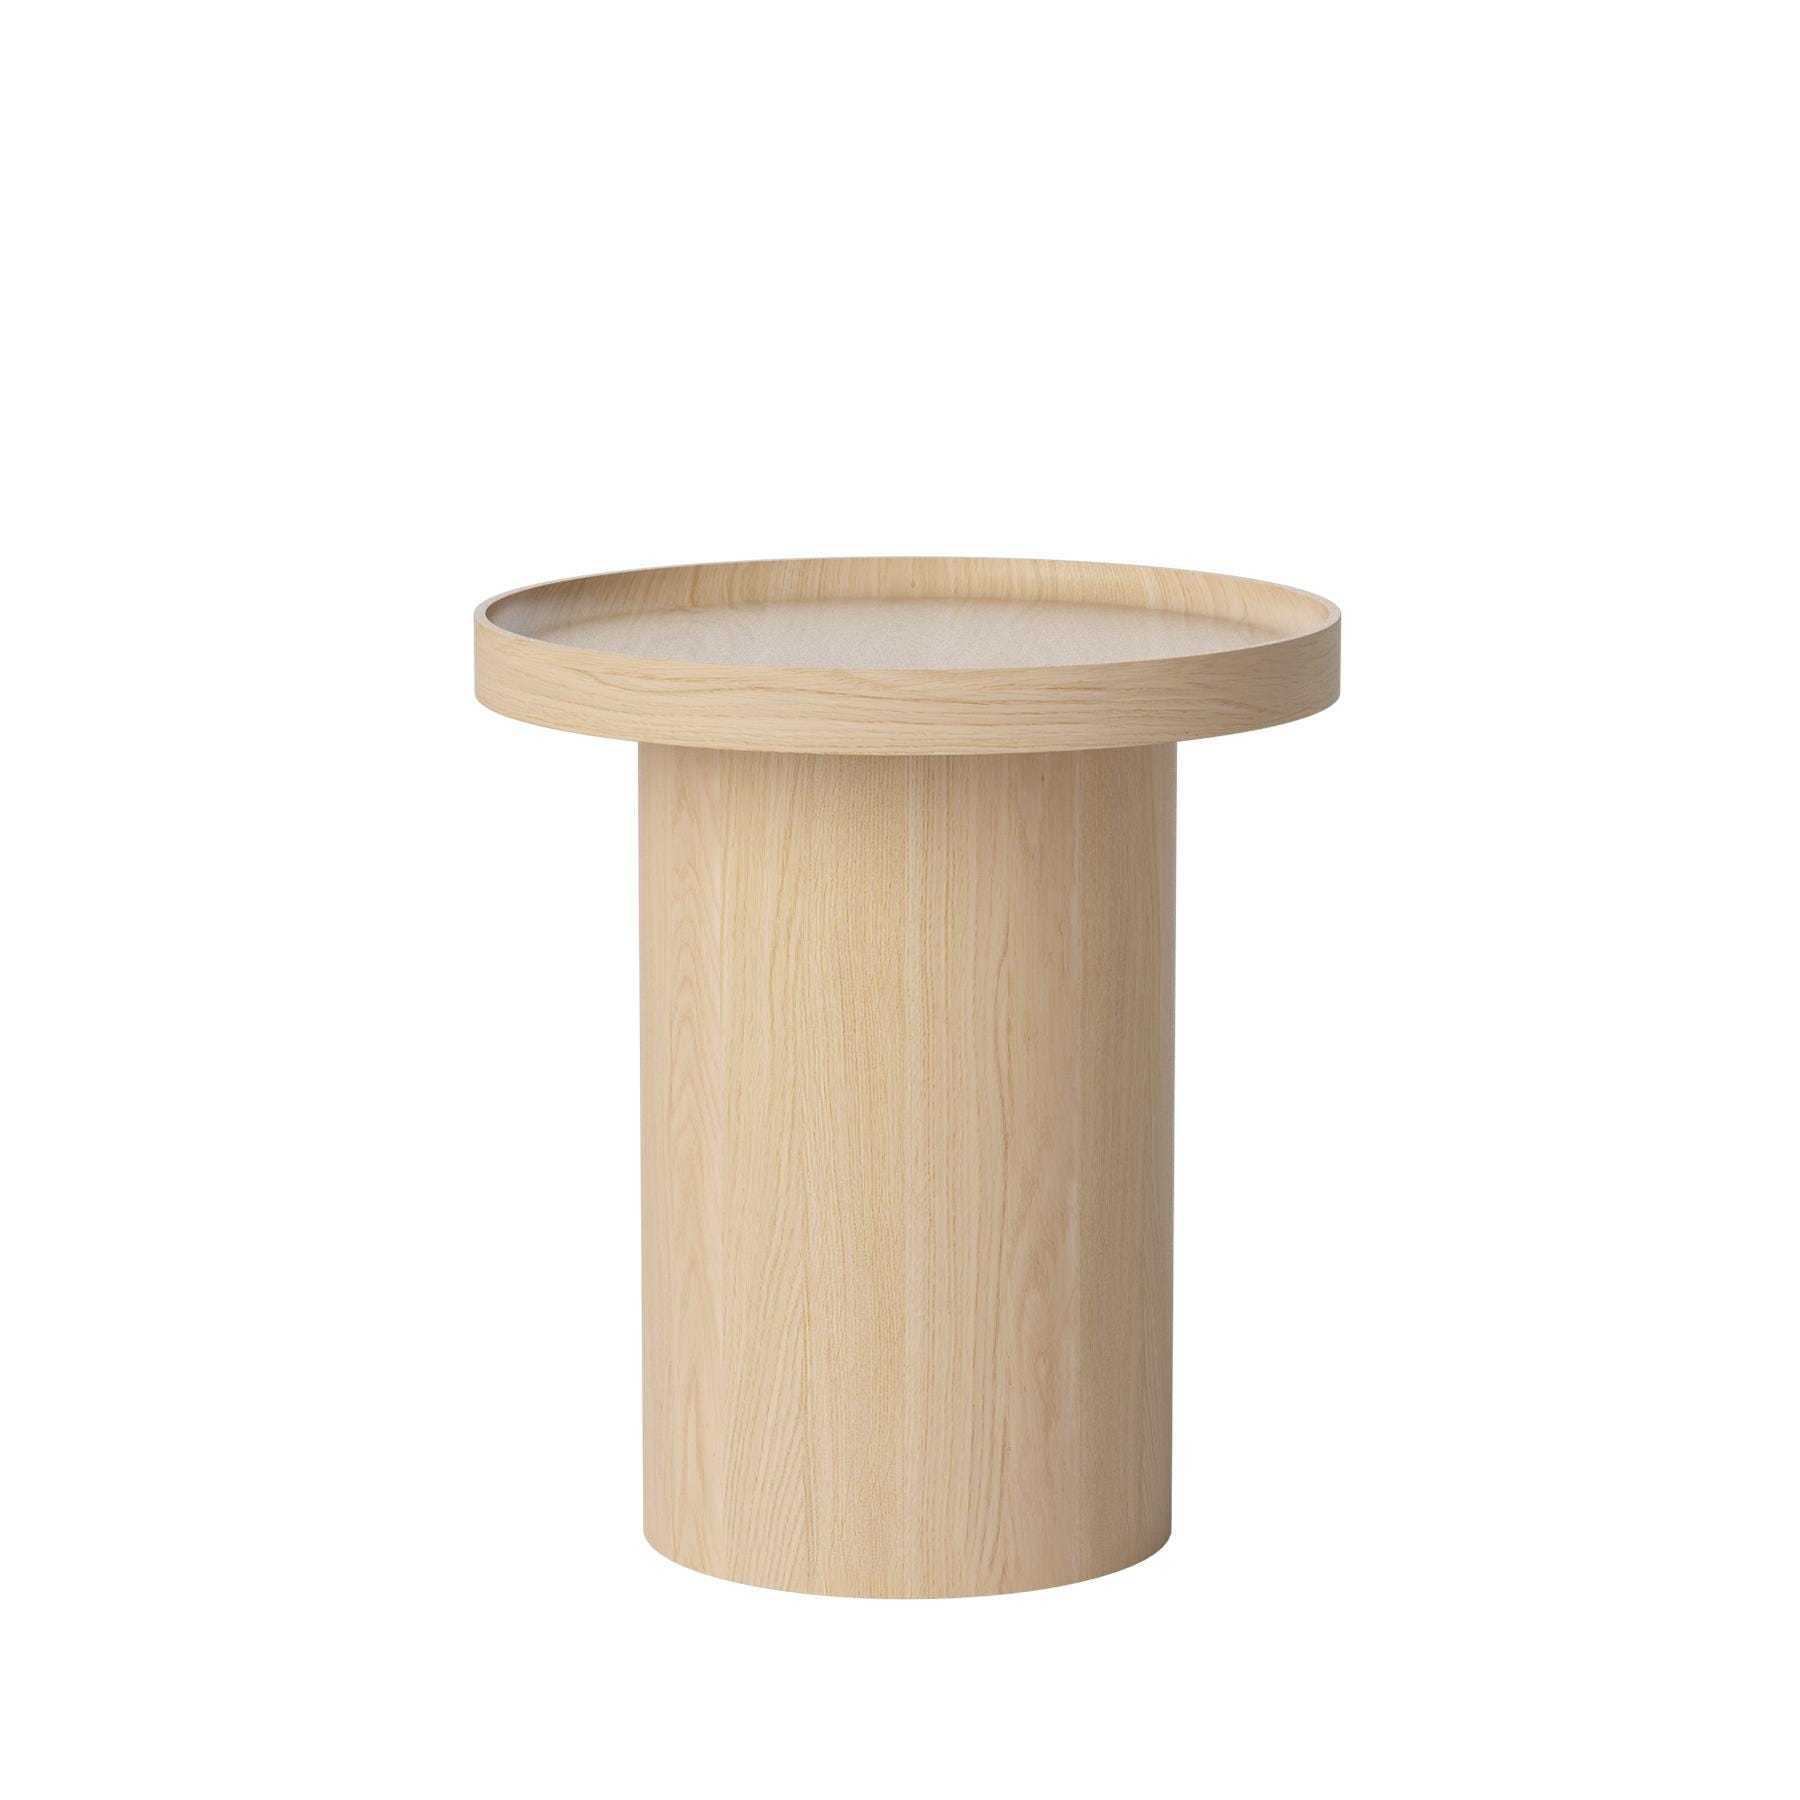 Bolia Plateau Coffee Table Small White Lacquered Oak Light Wood Designer Furniture From Holloways Of Ludlow